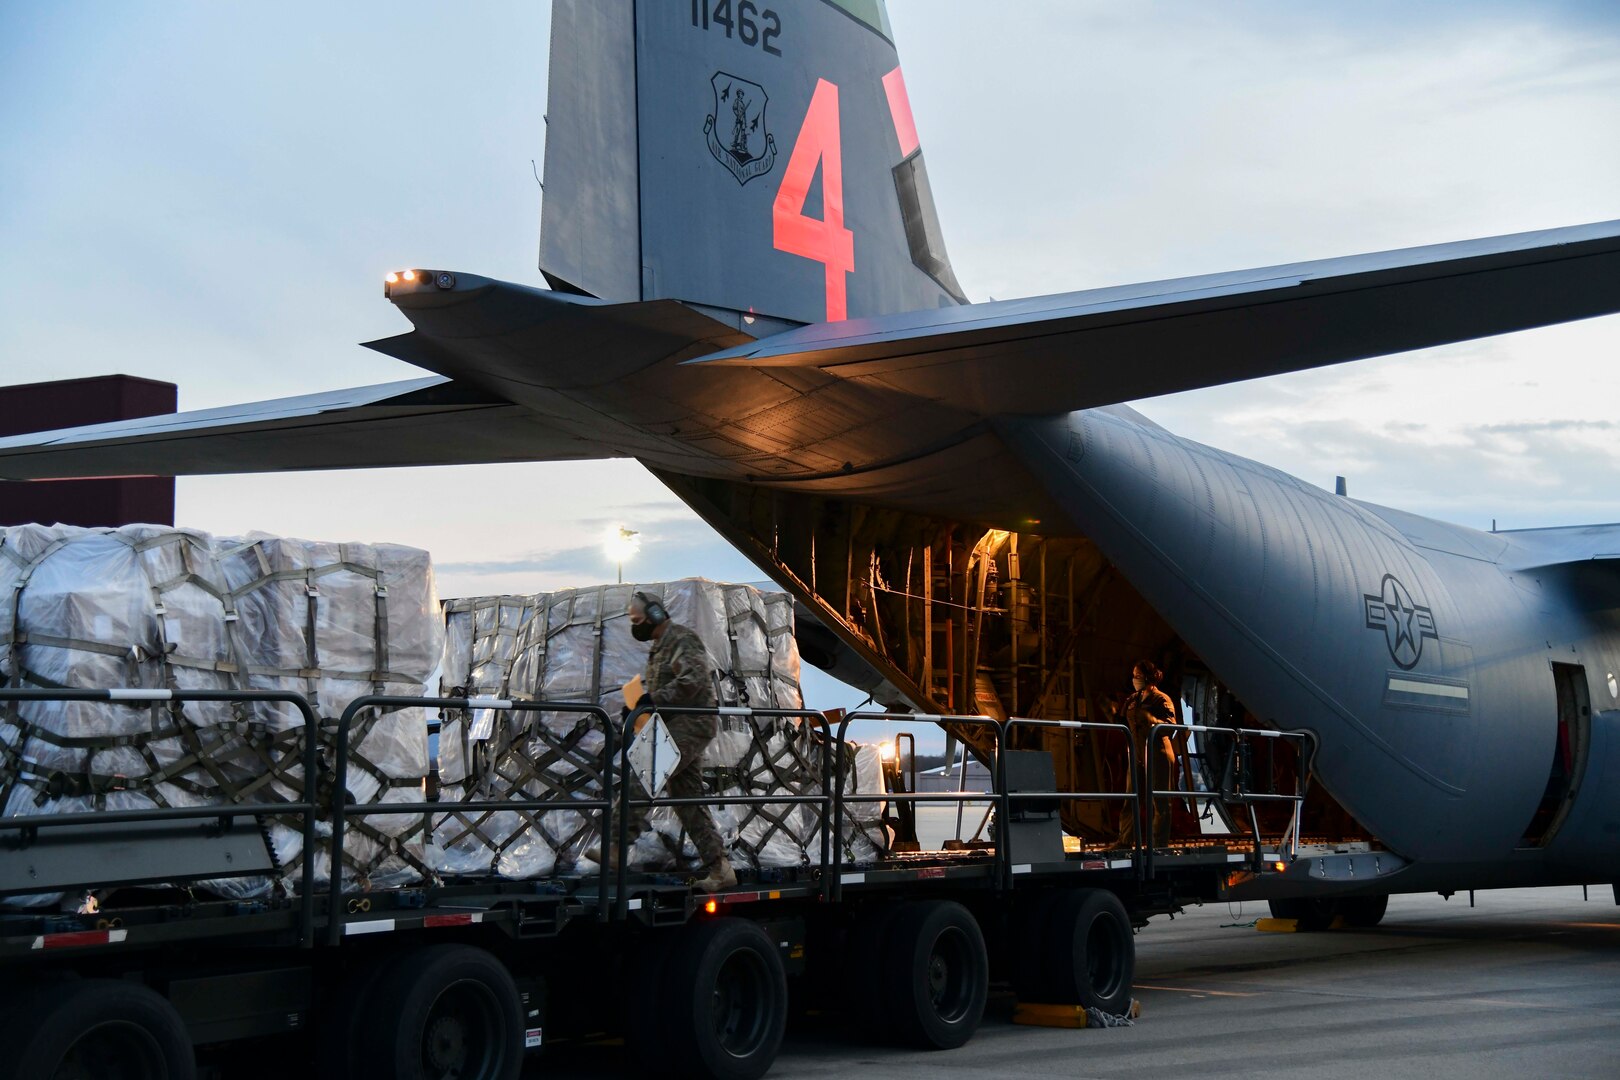 Airmen from the 146th Airlift Wing of the California Air National Guard in Oxnard, Calif., deliver 200 ventilators to the New York Air National Guard's  105th Airlift wing April 7, 2020, at Stewart Air National Guard Base, Newburgh, N.Y. The Cal Guard helped deliver 200 ventilators for use in New York and New Jersey, and 200 to Illinois for COVID-19 patients.